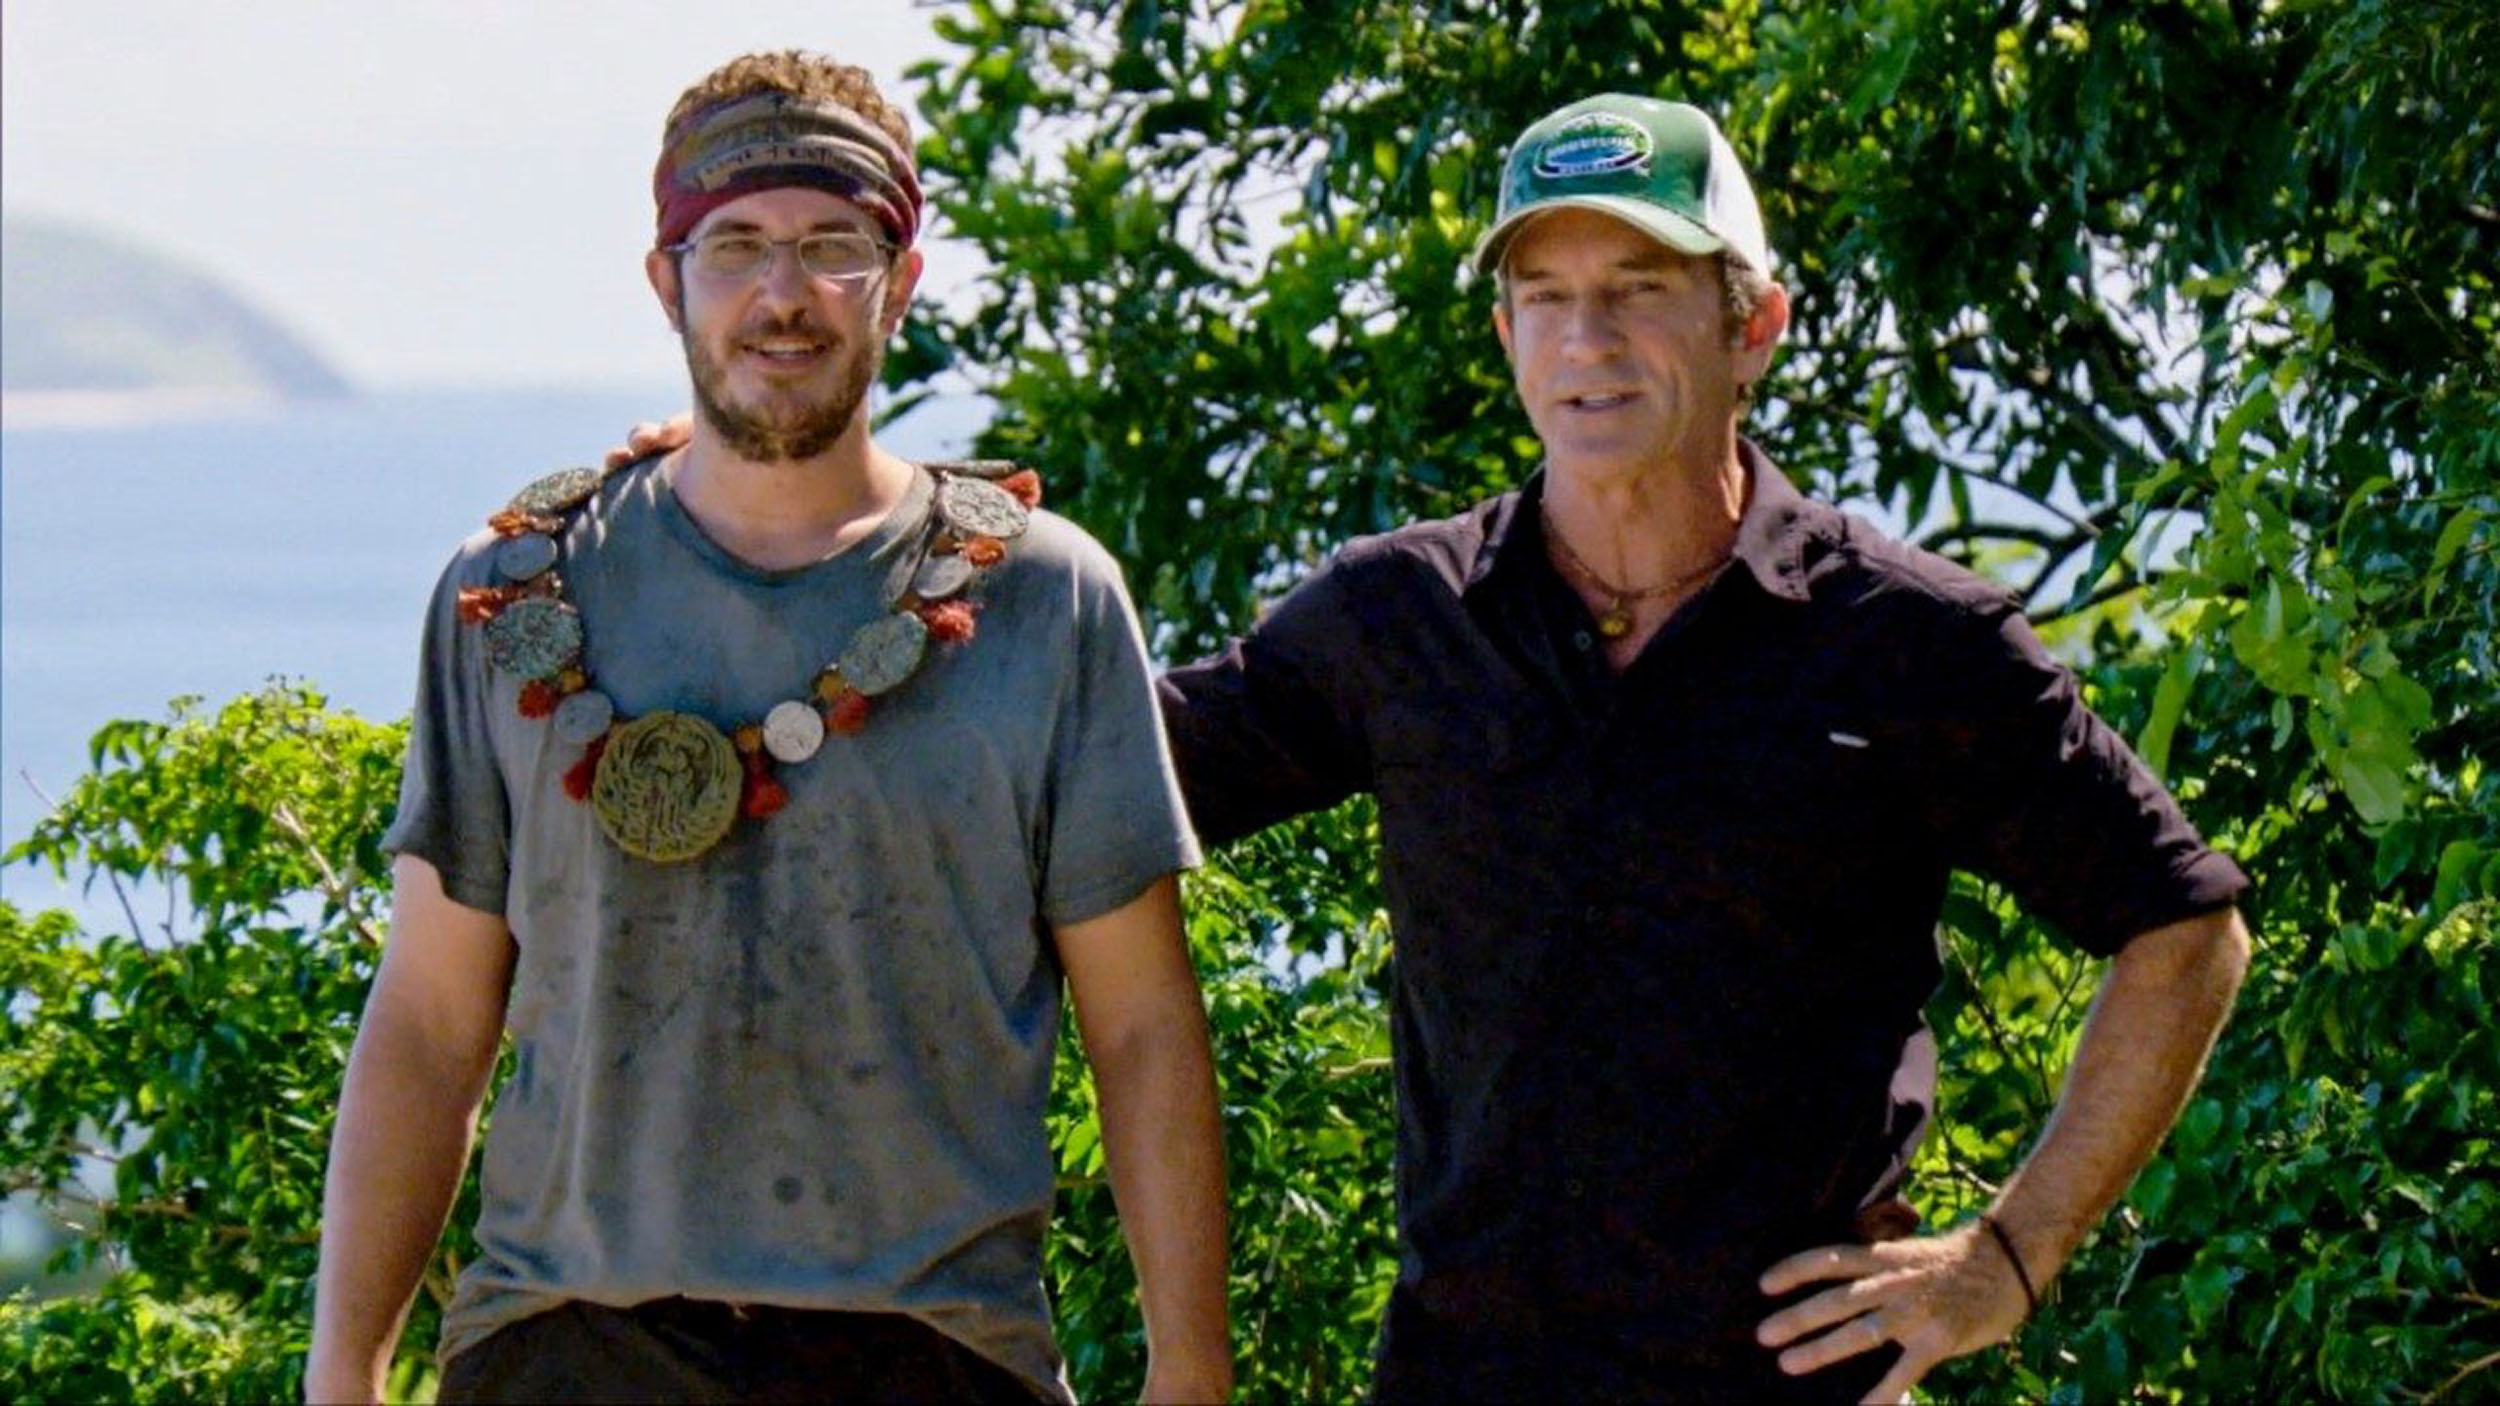 Jeff Probst awards Rick Devens with the Immunity Necklace